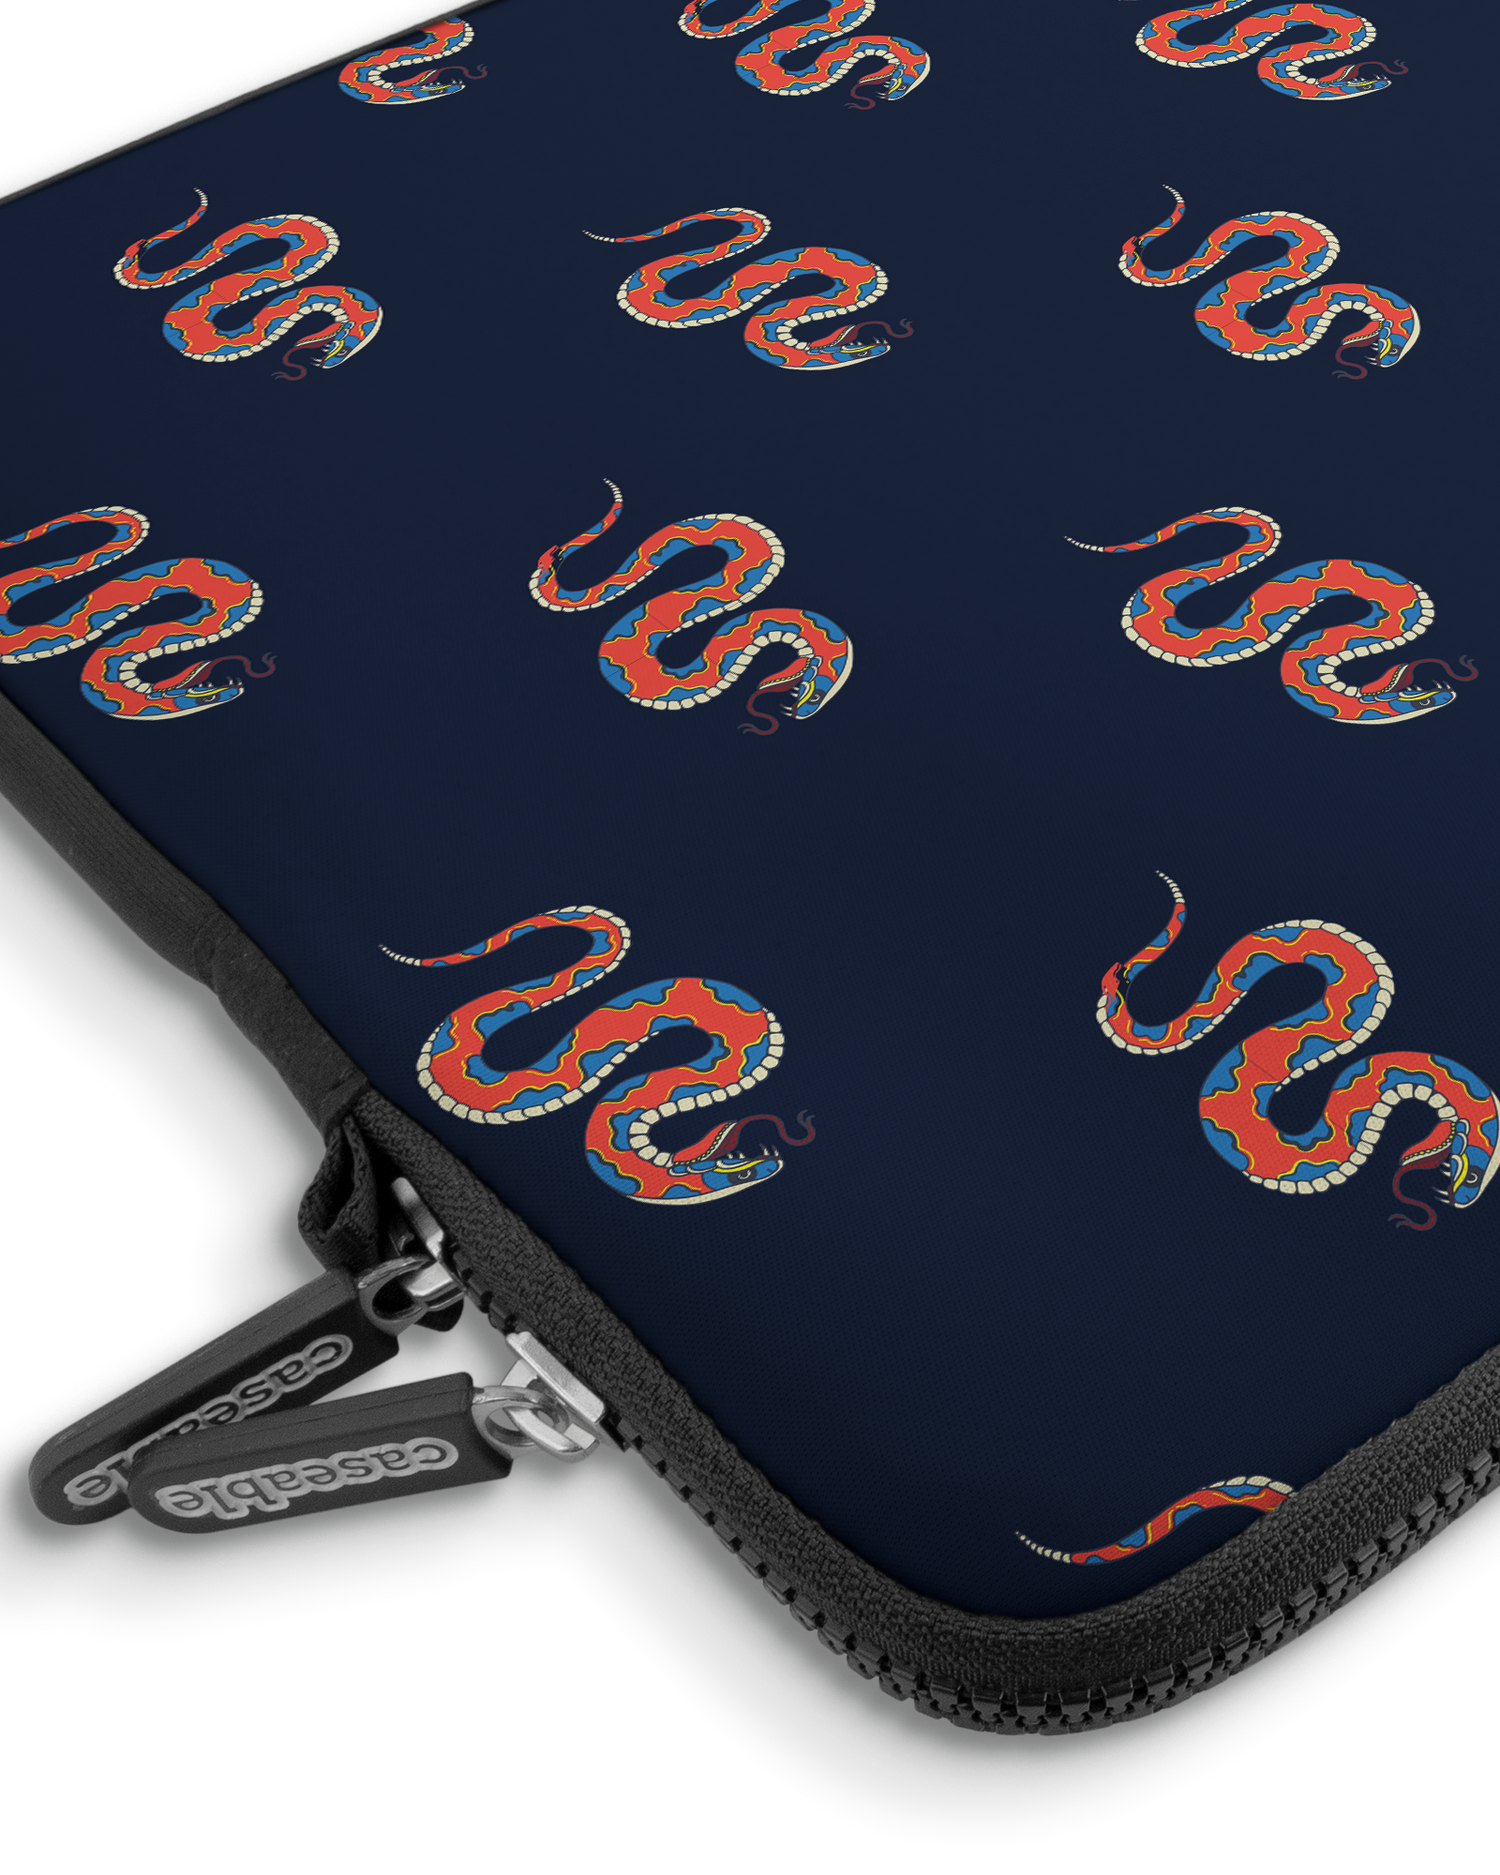 Repeating Snakes Premium Laptop Bag 15 inch with device inside